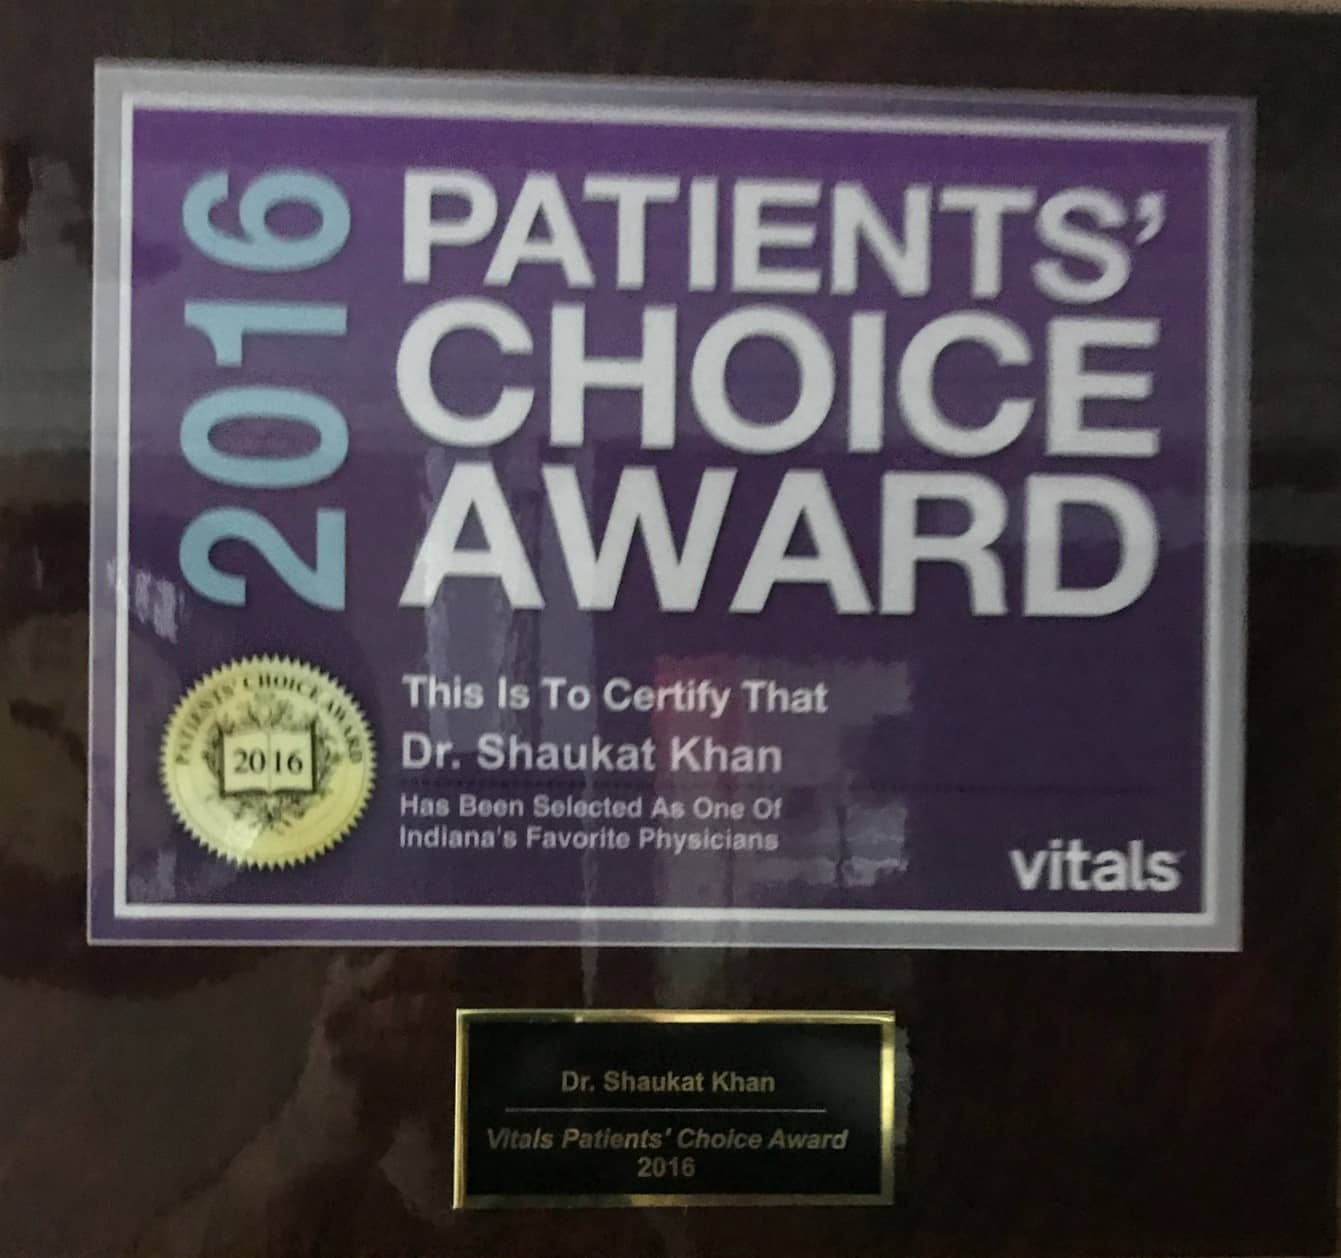 GRANTED TO PHYSICIANS WHO TREAT THEIR PATIENTS WITH THE UTMOST KINDNESS.